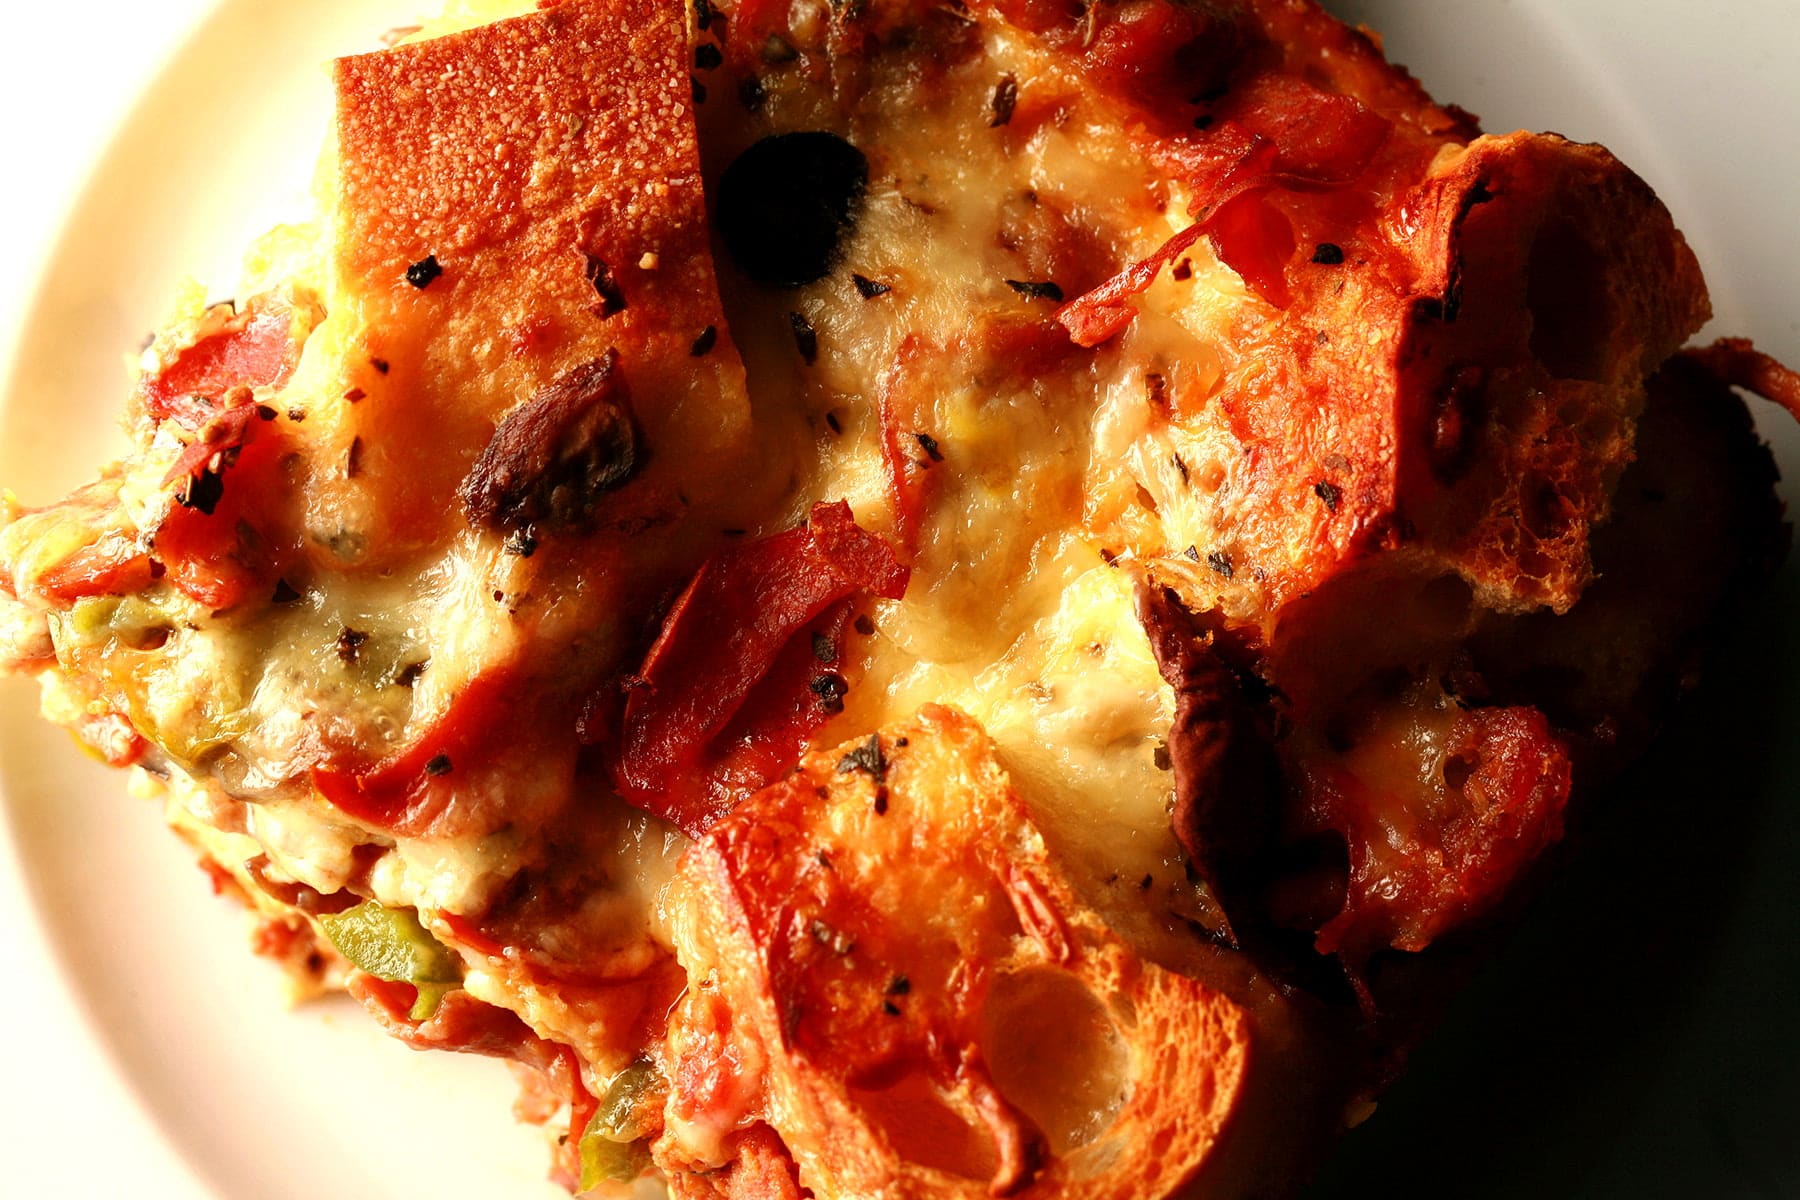 A square of deluxe pizza bread pudding: A brunch casserole featuring pepperoni, sausage, mushrooms, green peppers, black olives, marinara sauce, and cheese.